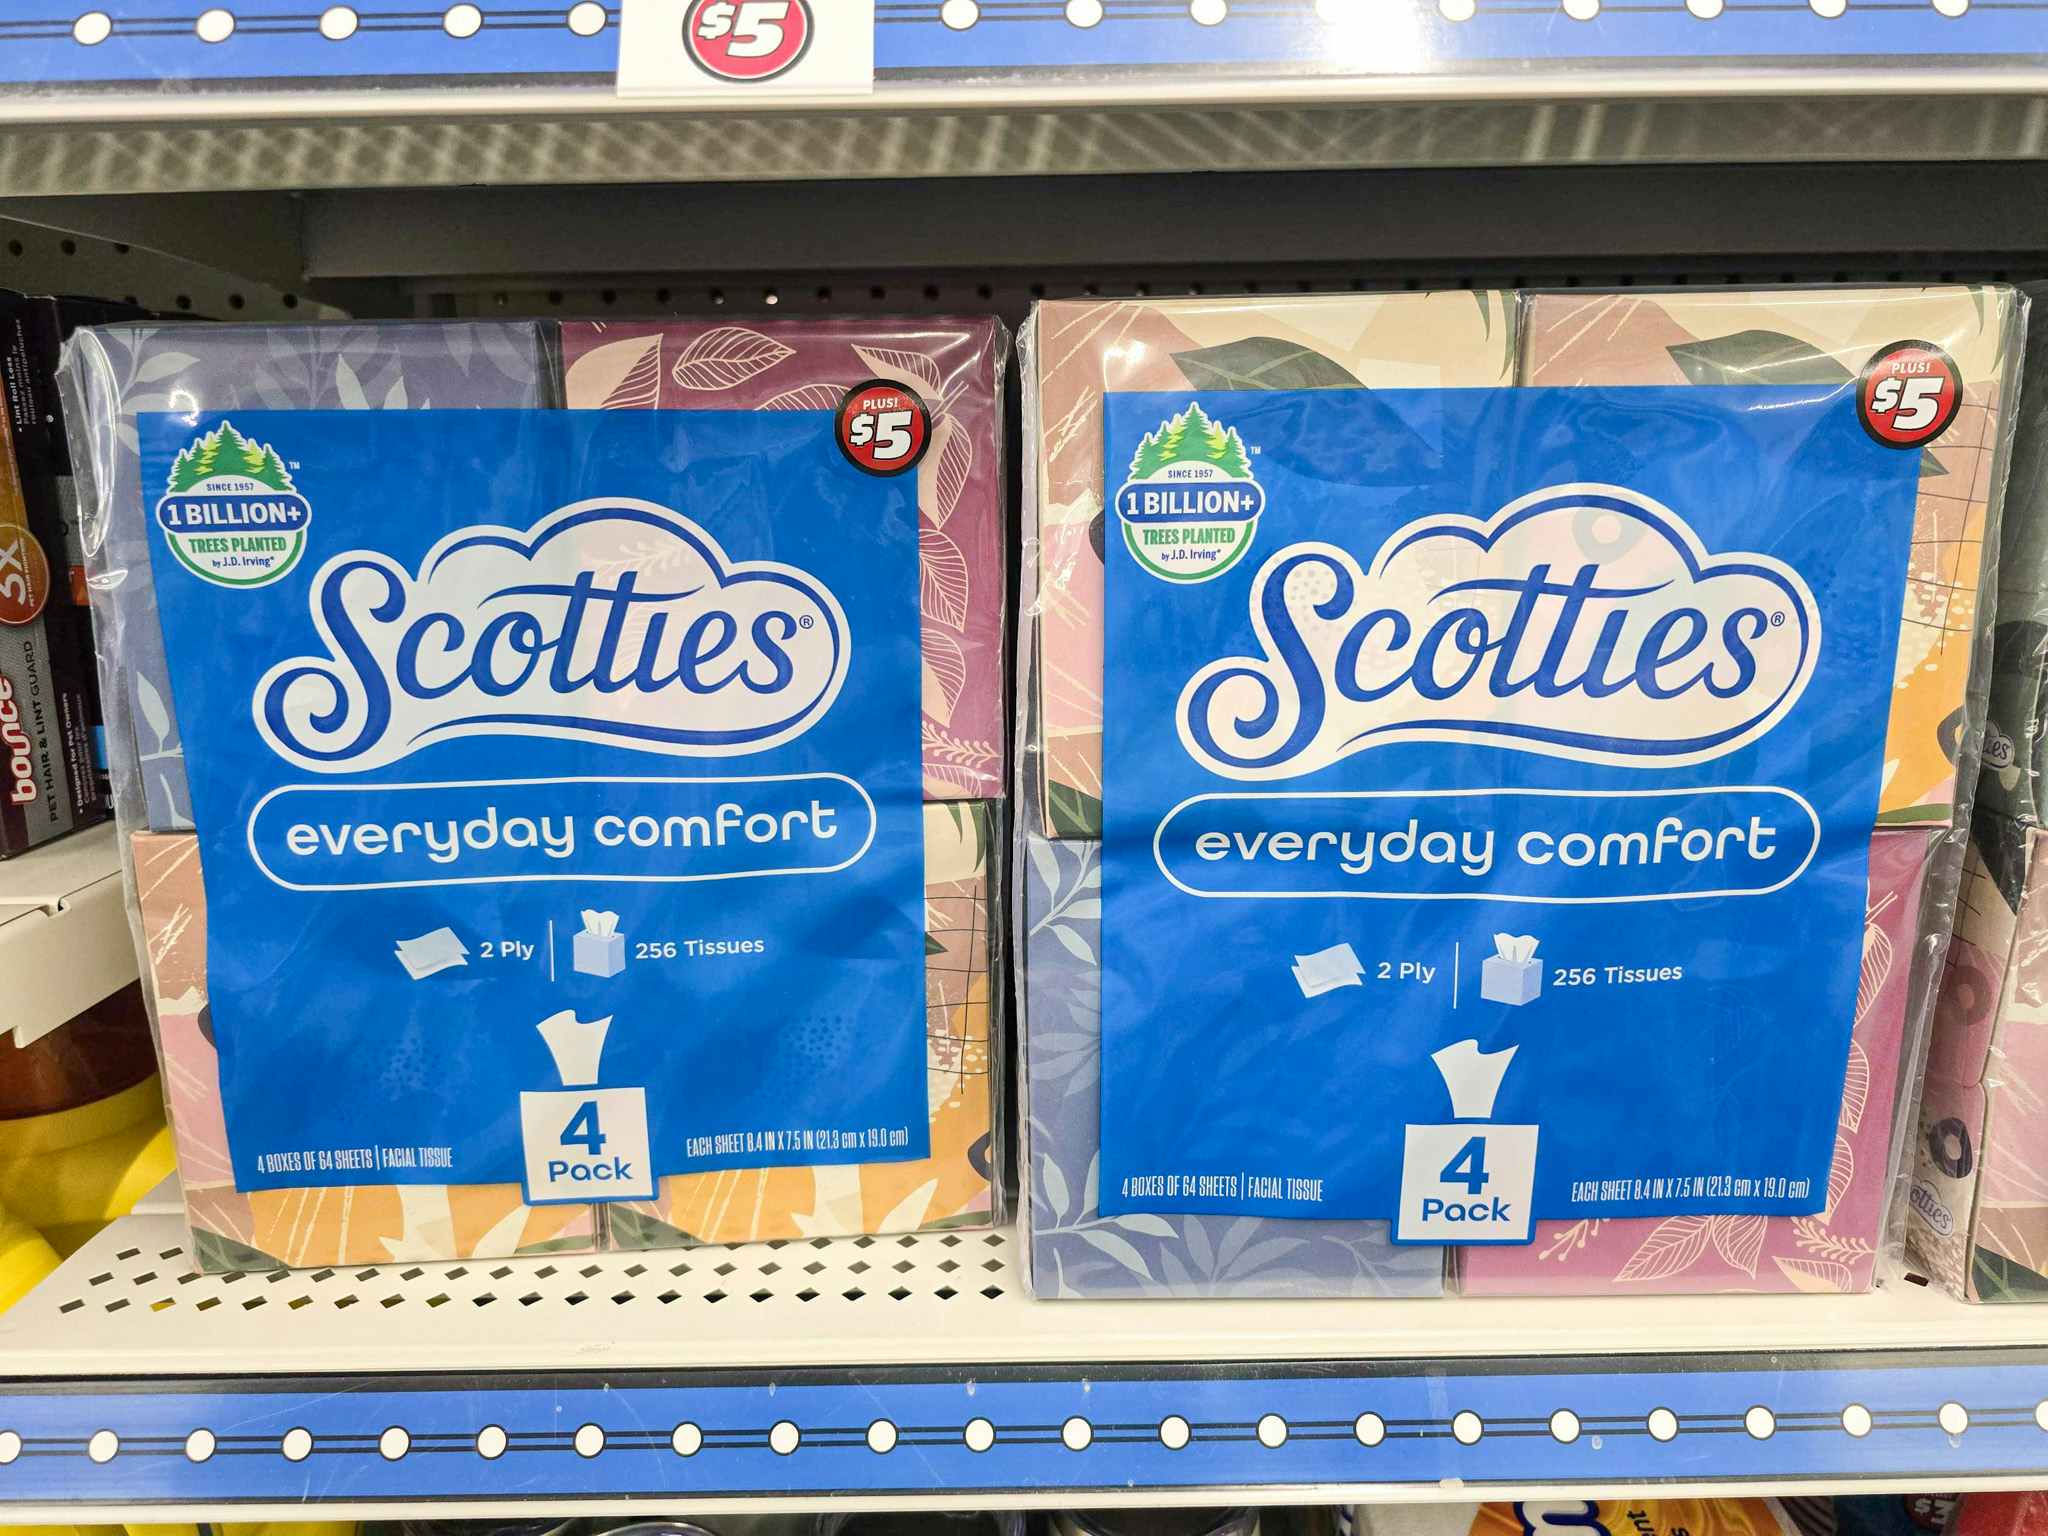 4-packs of scotties facial tissues on a shelf